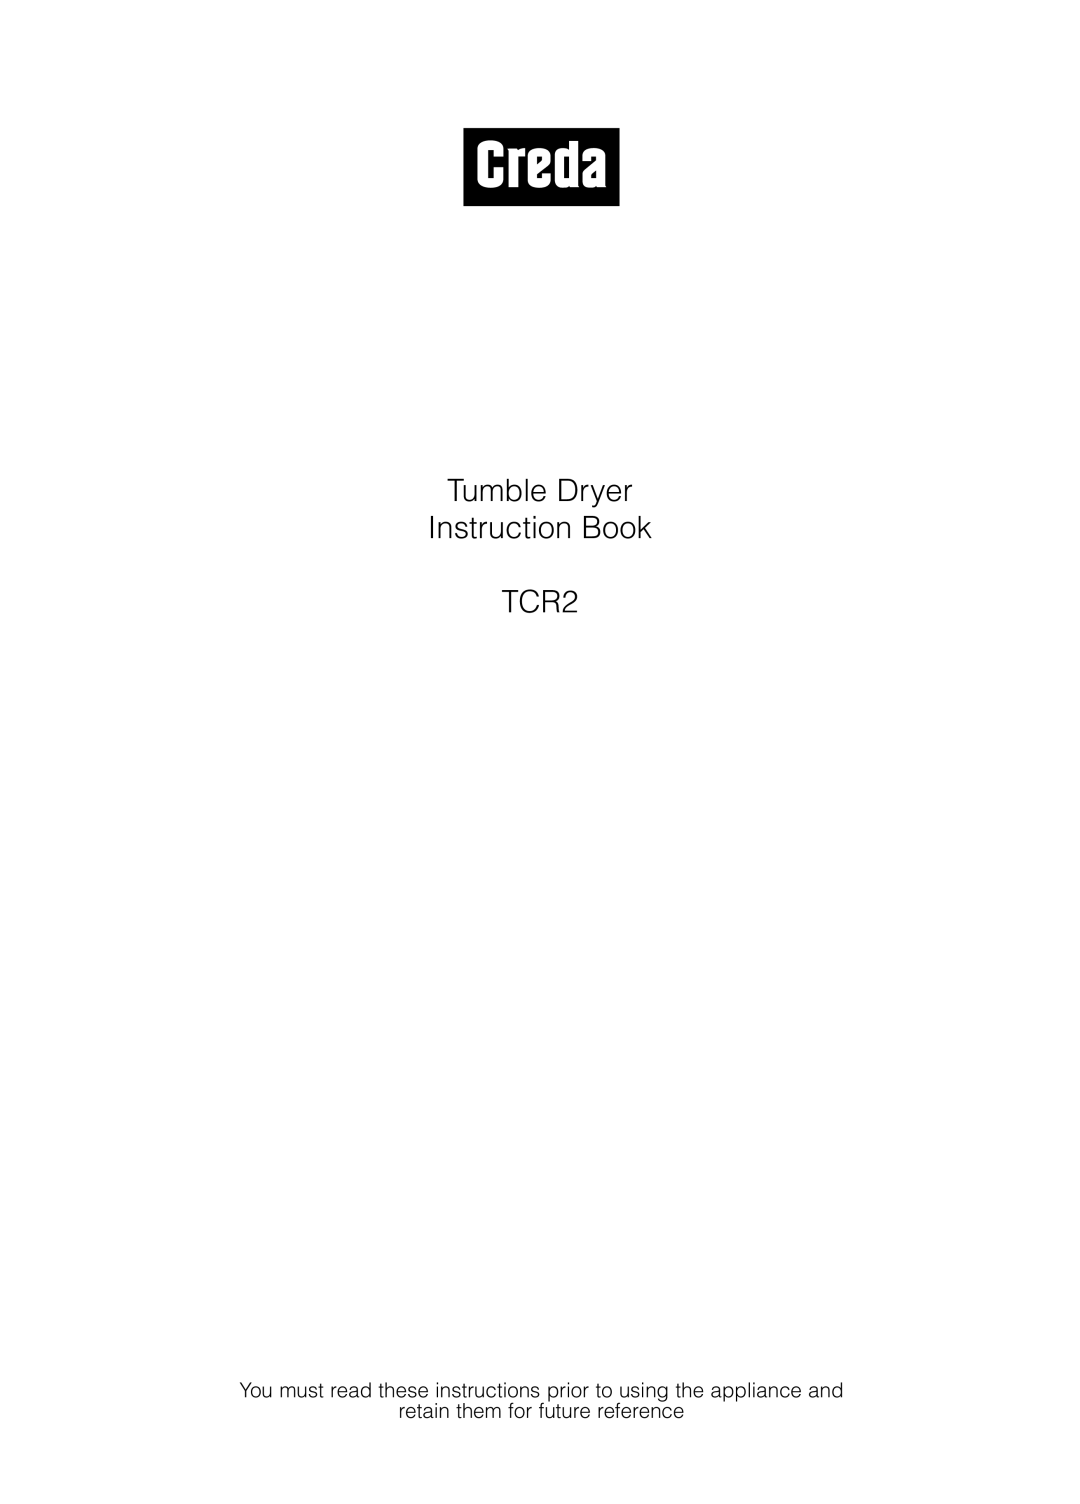 Creda manual Tumble Dryer Instruction Book TCR2, You must read these instructions prior to using the appliance and 